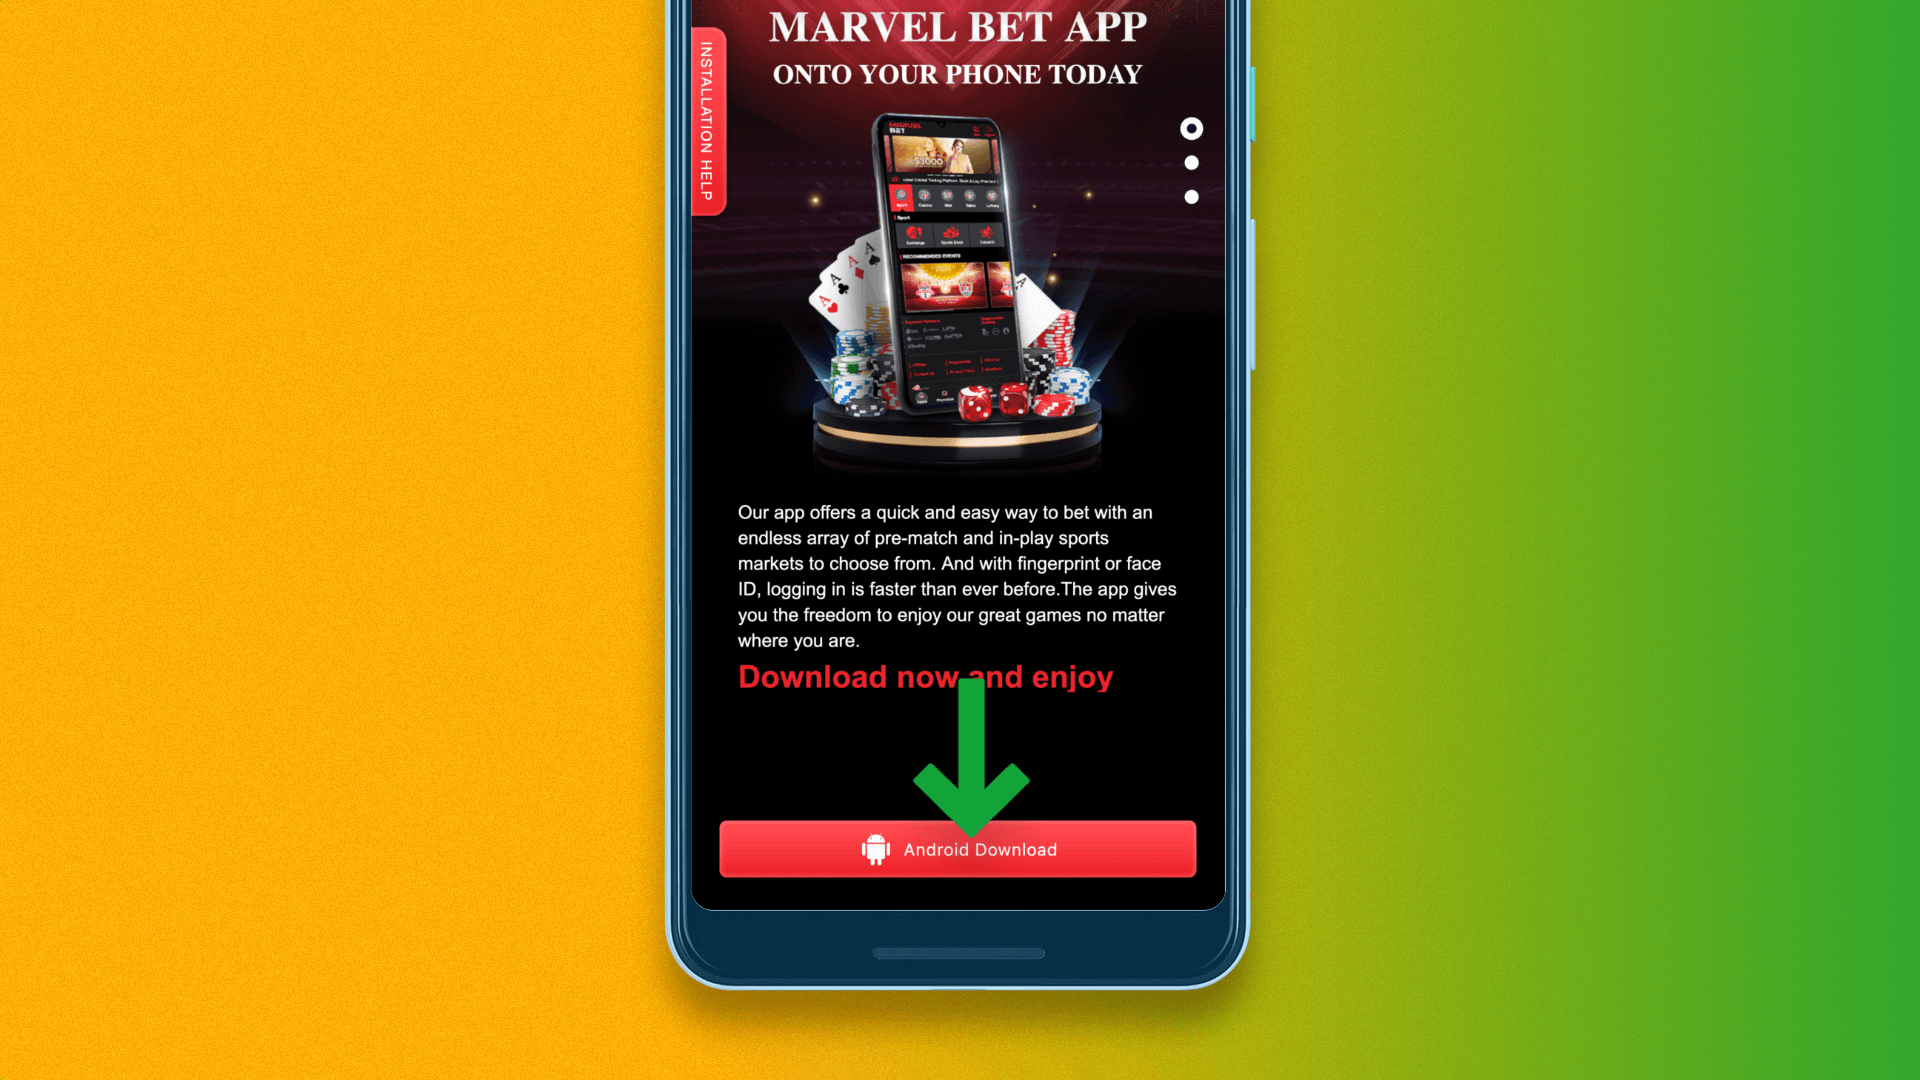 Downloading the Marvelbet mobile app for sports betting in India